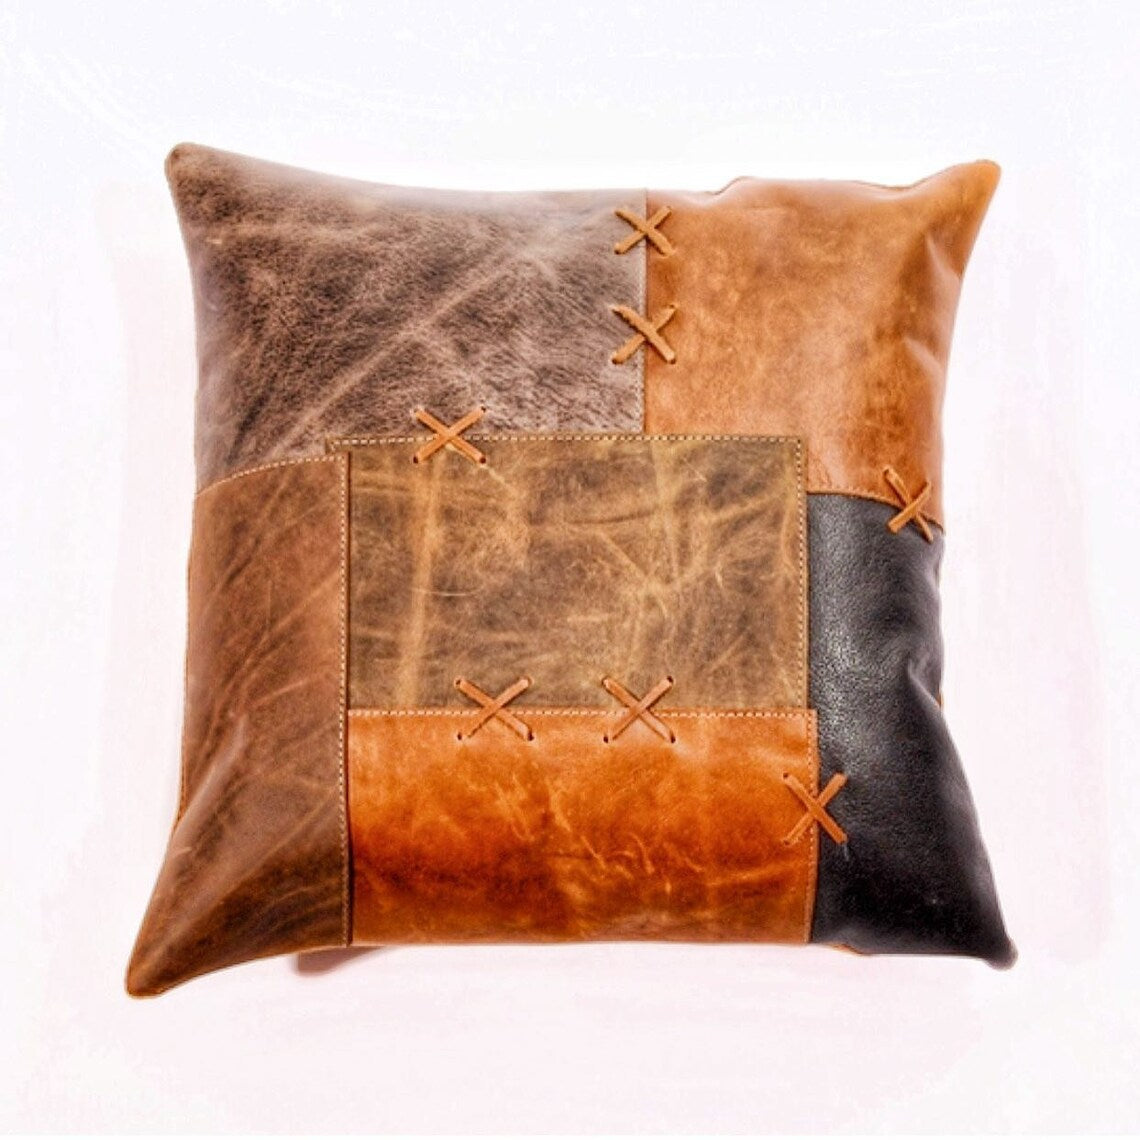 Melbourne Leather Co Genuine Leather Cushion Tan Leather Cushion Patchwork Cushion Gift Decorative Pillow Gift for Her Handmade 45*45cm - LCC04